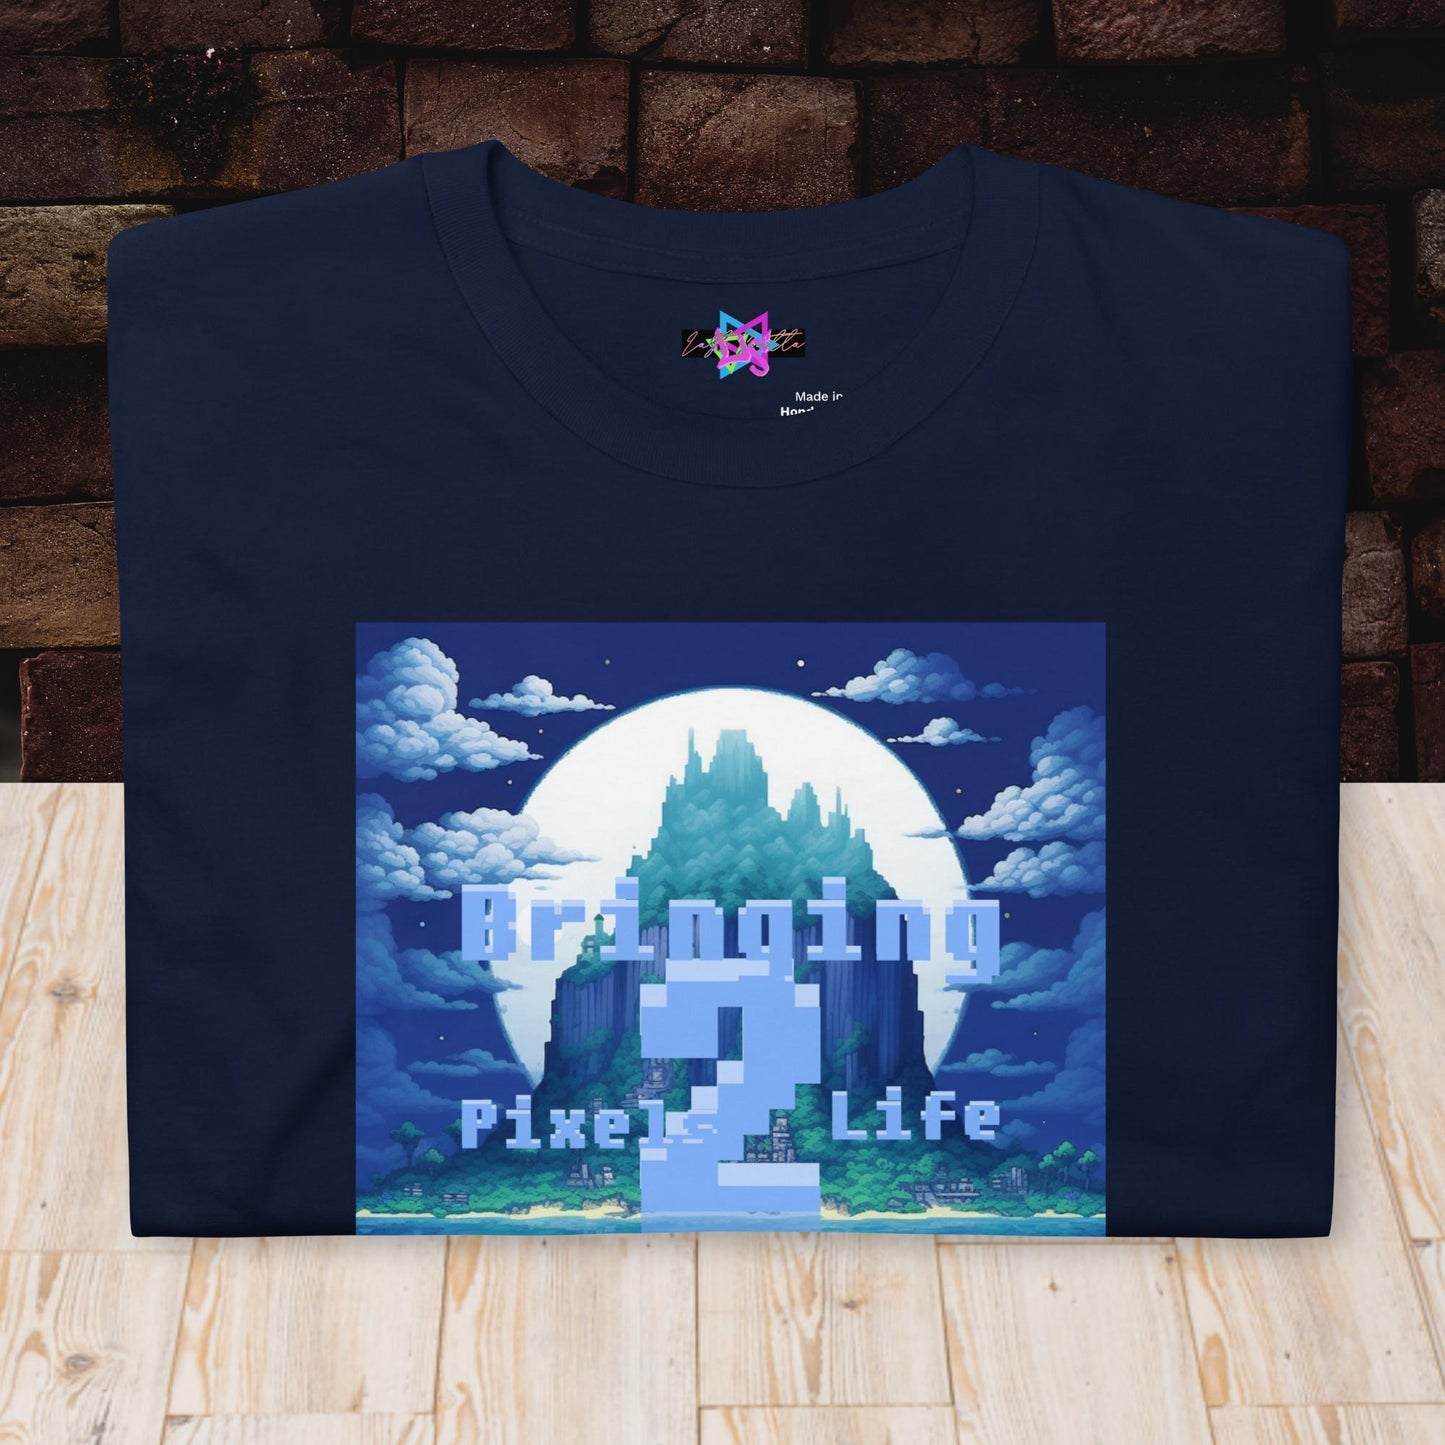 Bringing Pixel 2 Life Unisex Basic Softstyle T-Shirt,  Graphic T-Shirt, Premium Graphic Tees, Cool Design T Shirts,  Streetwear Casual Summer Tops T-Shirt Unisex